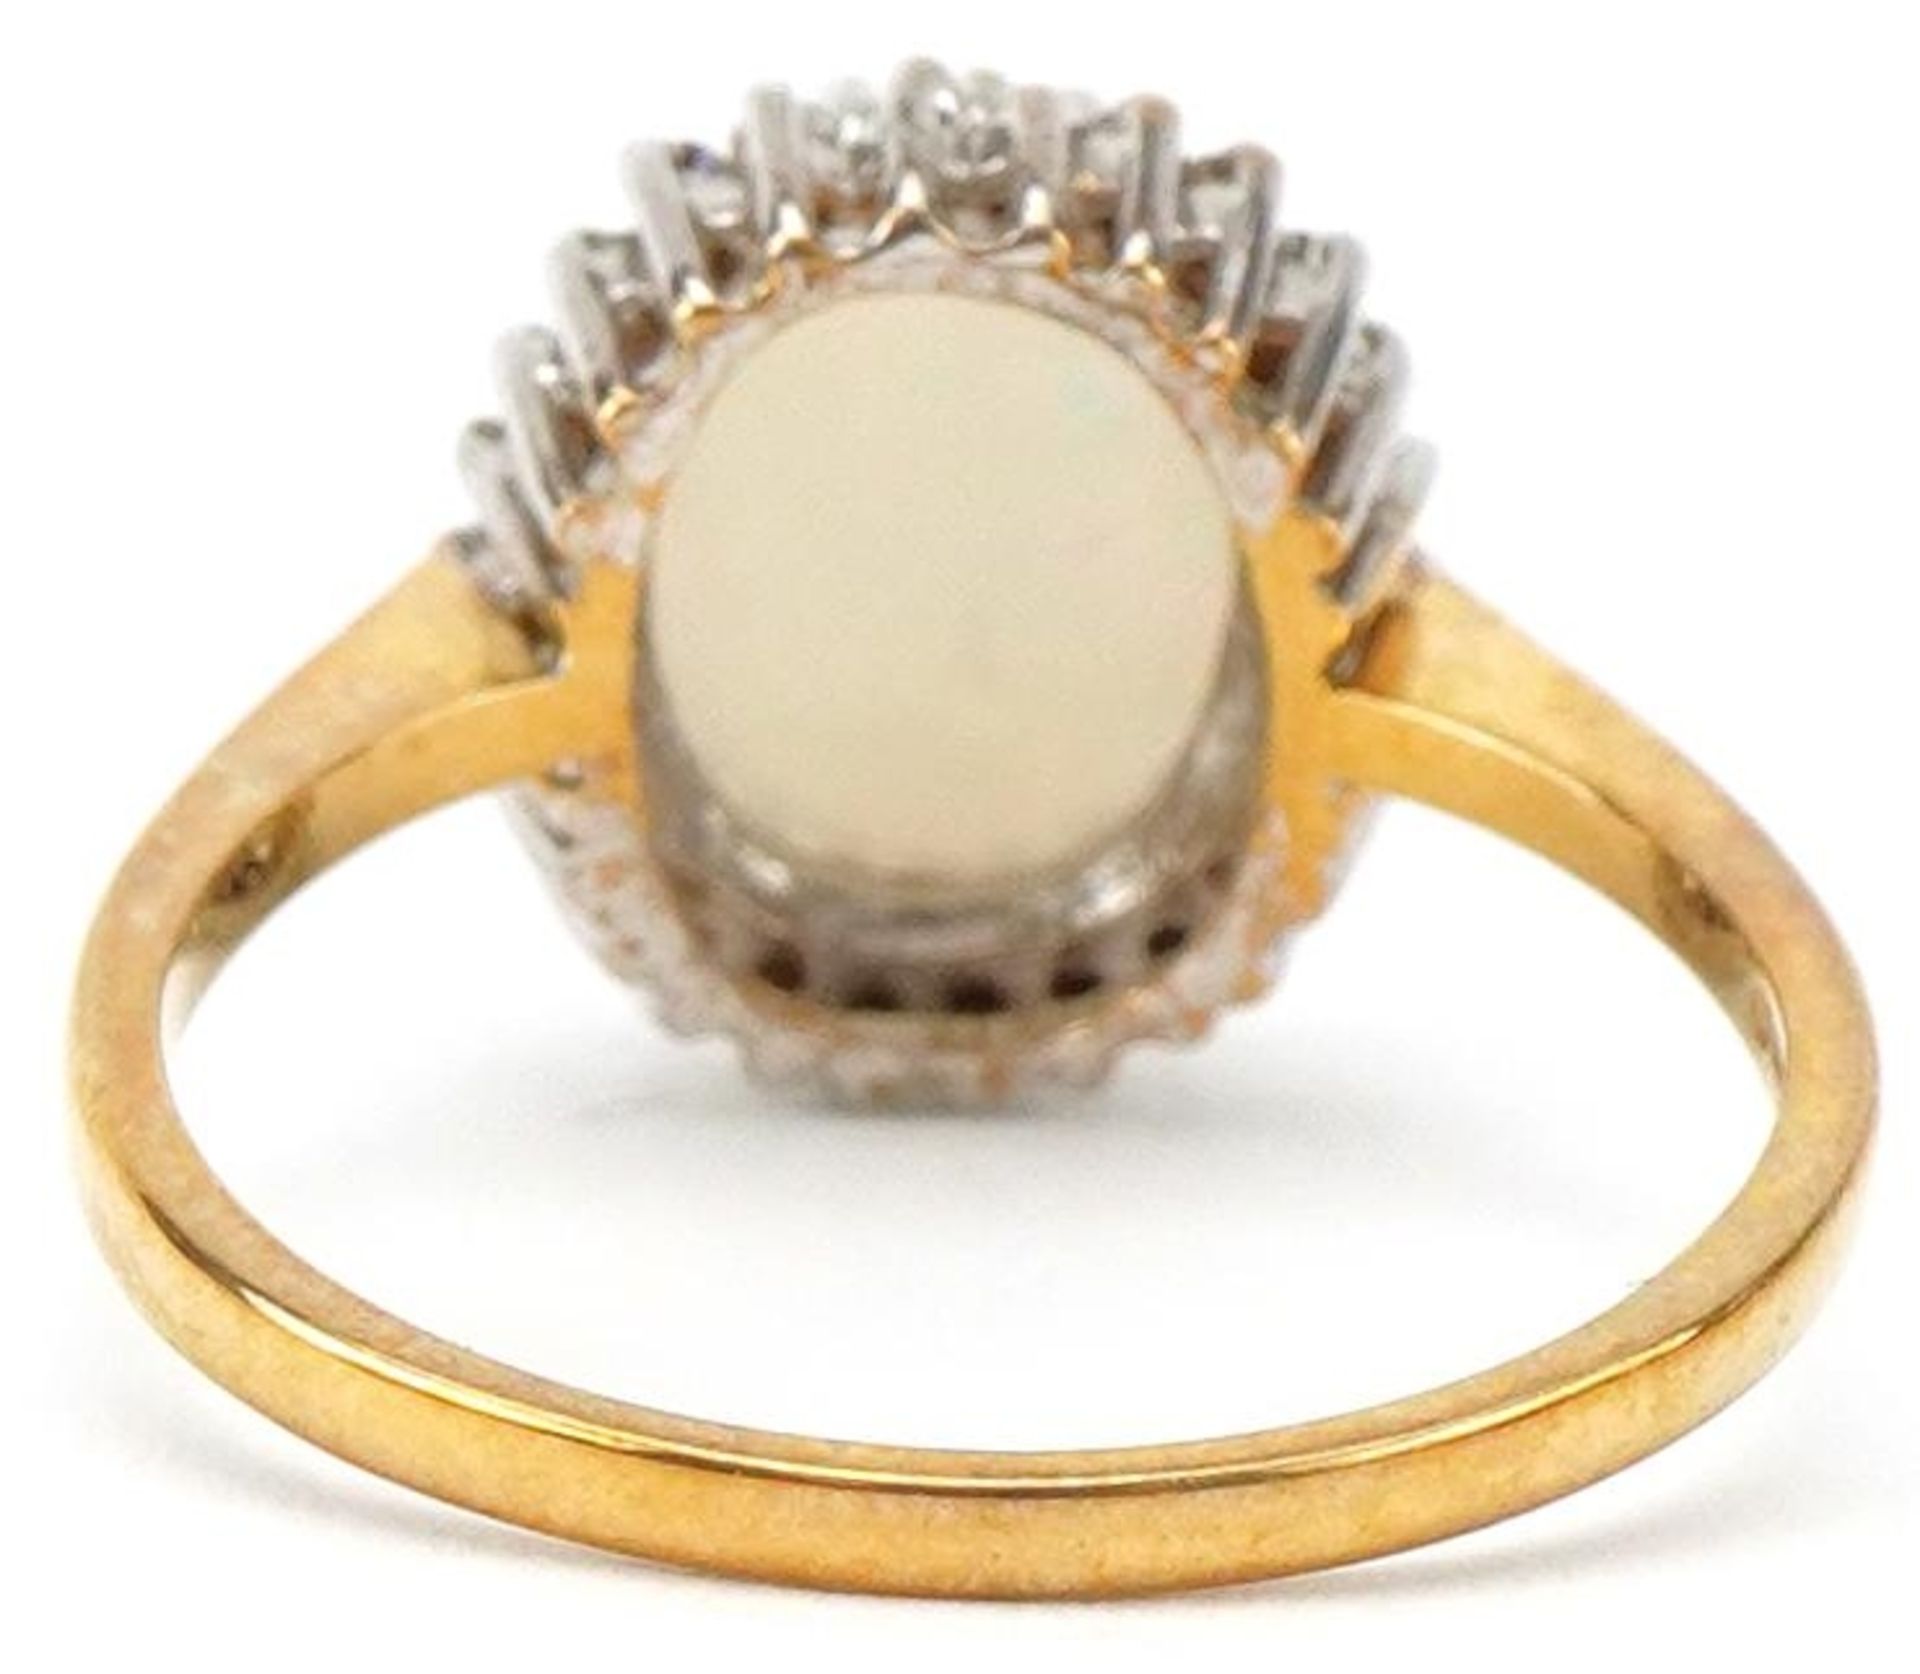 9ct gold cabochon opal and diamond cluster ring, the opal approximately 9.80mm x 7.80mm x 2.80mm - Image 3 of 6